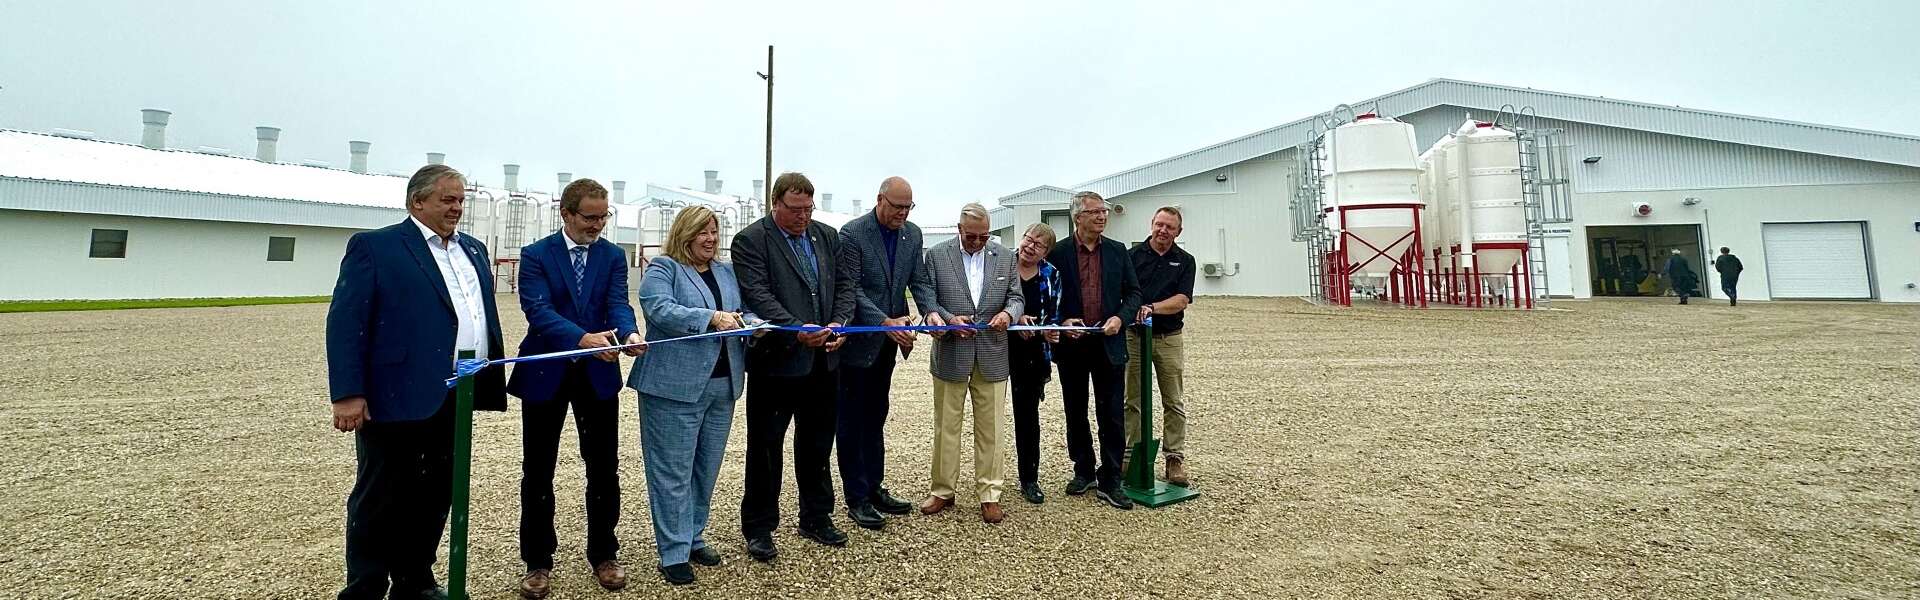 Nine people take part in a ceremonial ribbon cutting in front of the new Ontario Swine Research Centre